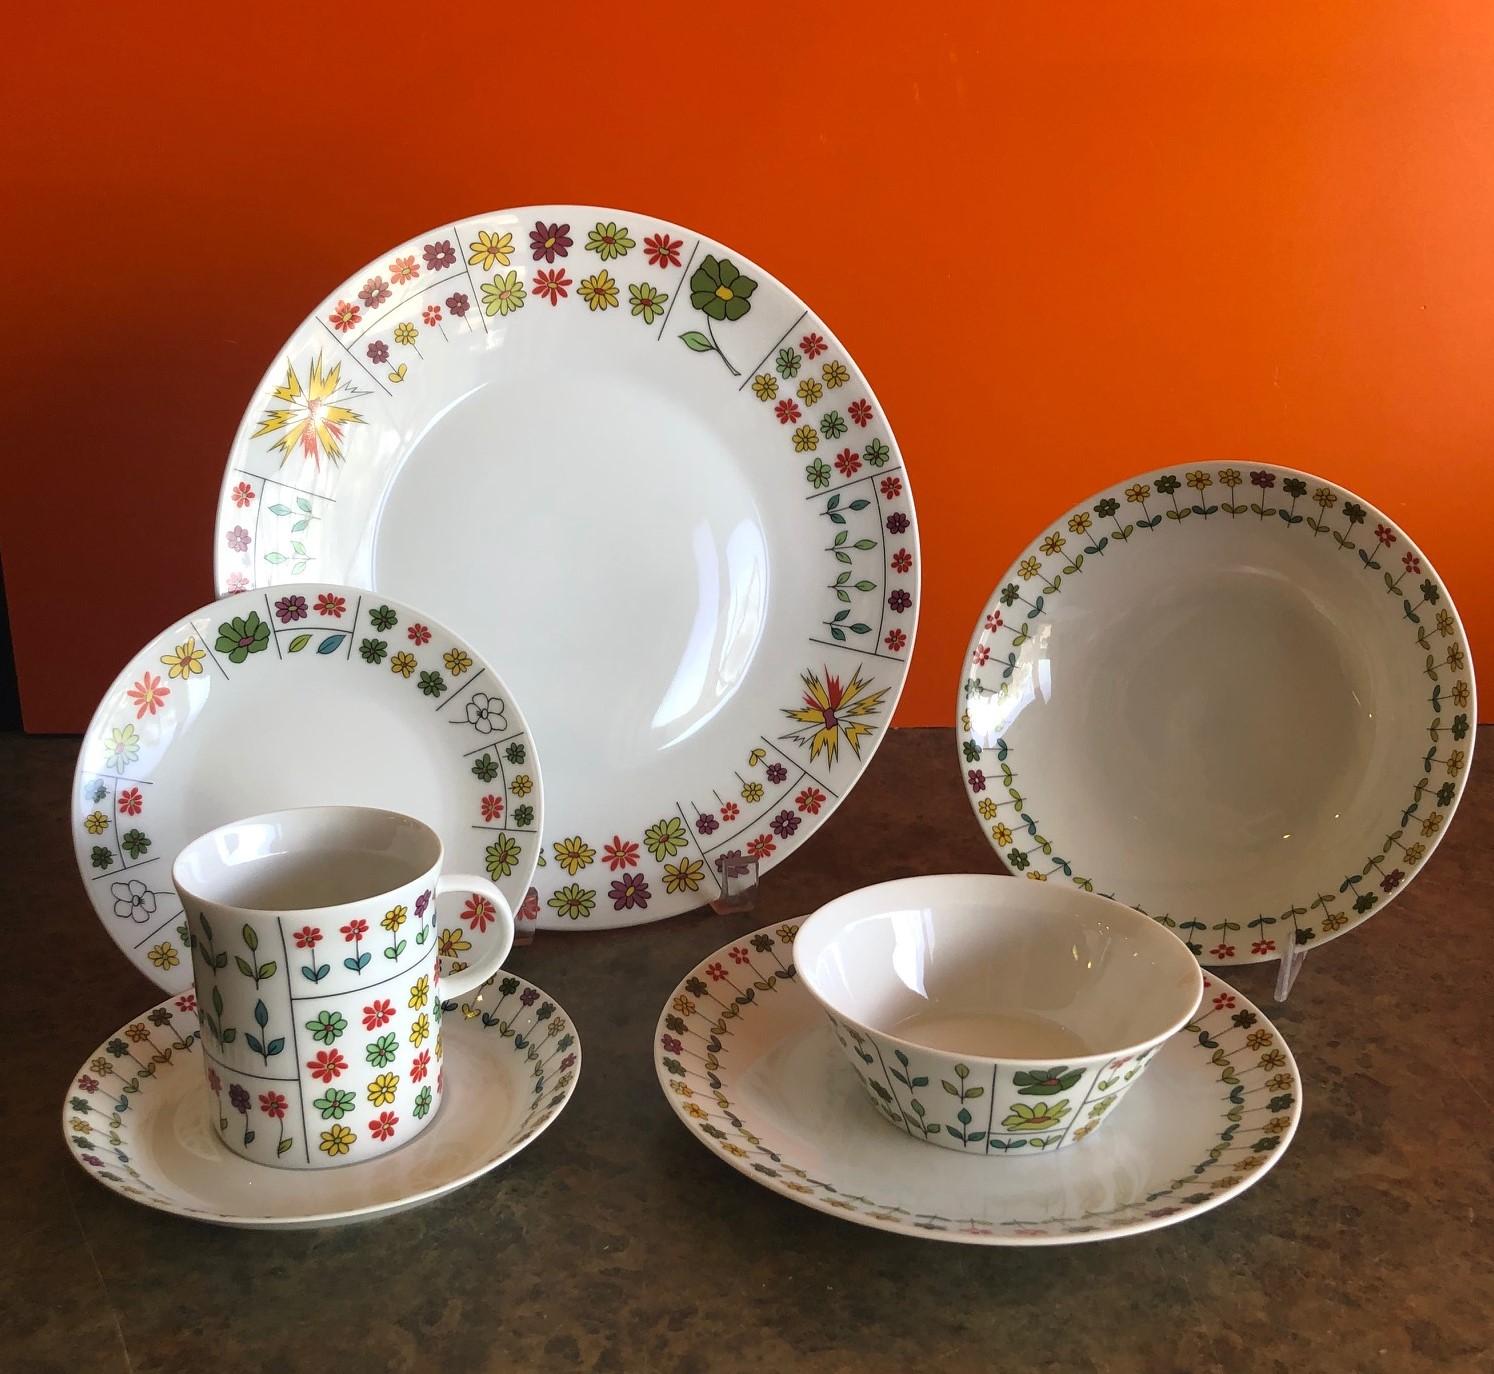 Wonderful 97 piece set of midcentury dinnerware by Emilio Pucci for Rosenthal Studio Line, circa 1960s. The pattern is 